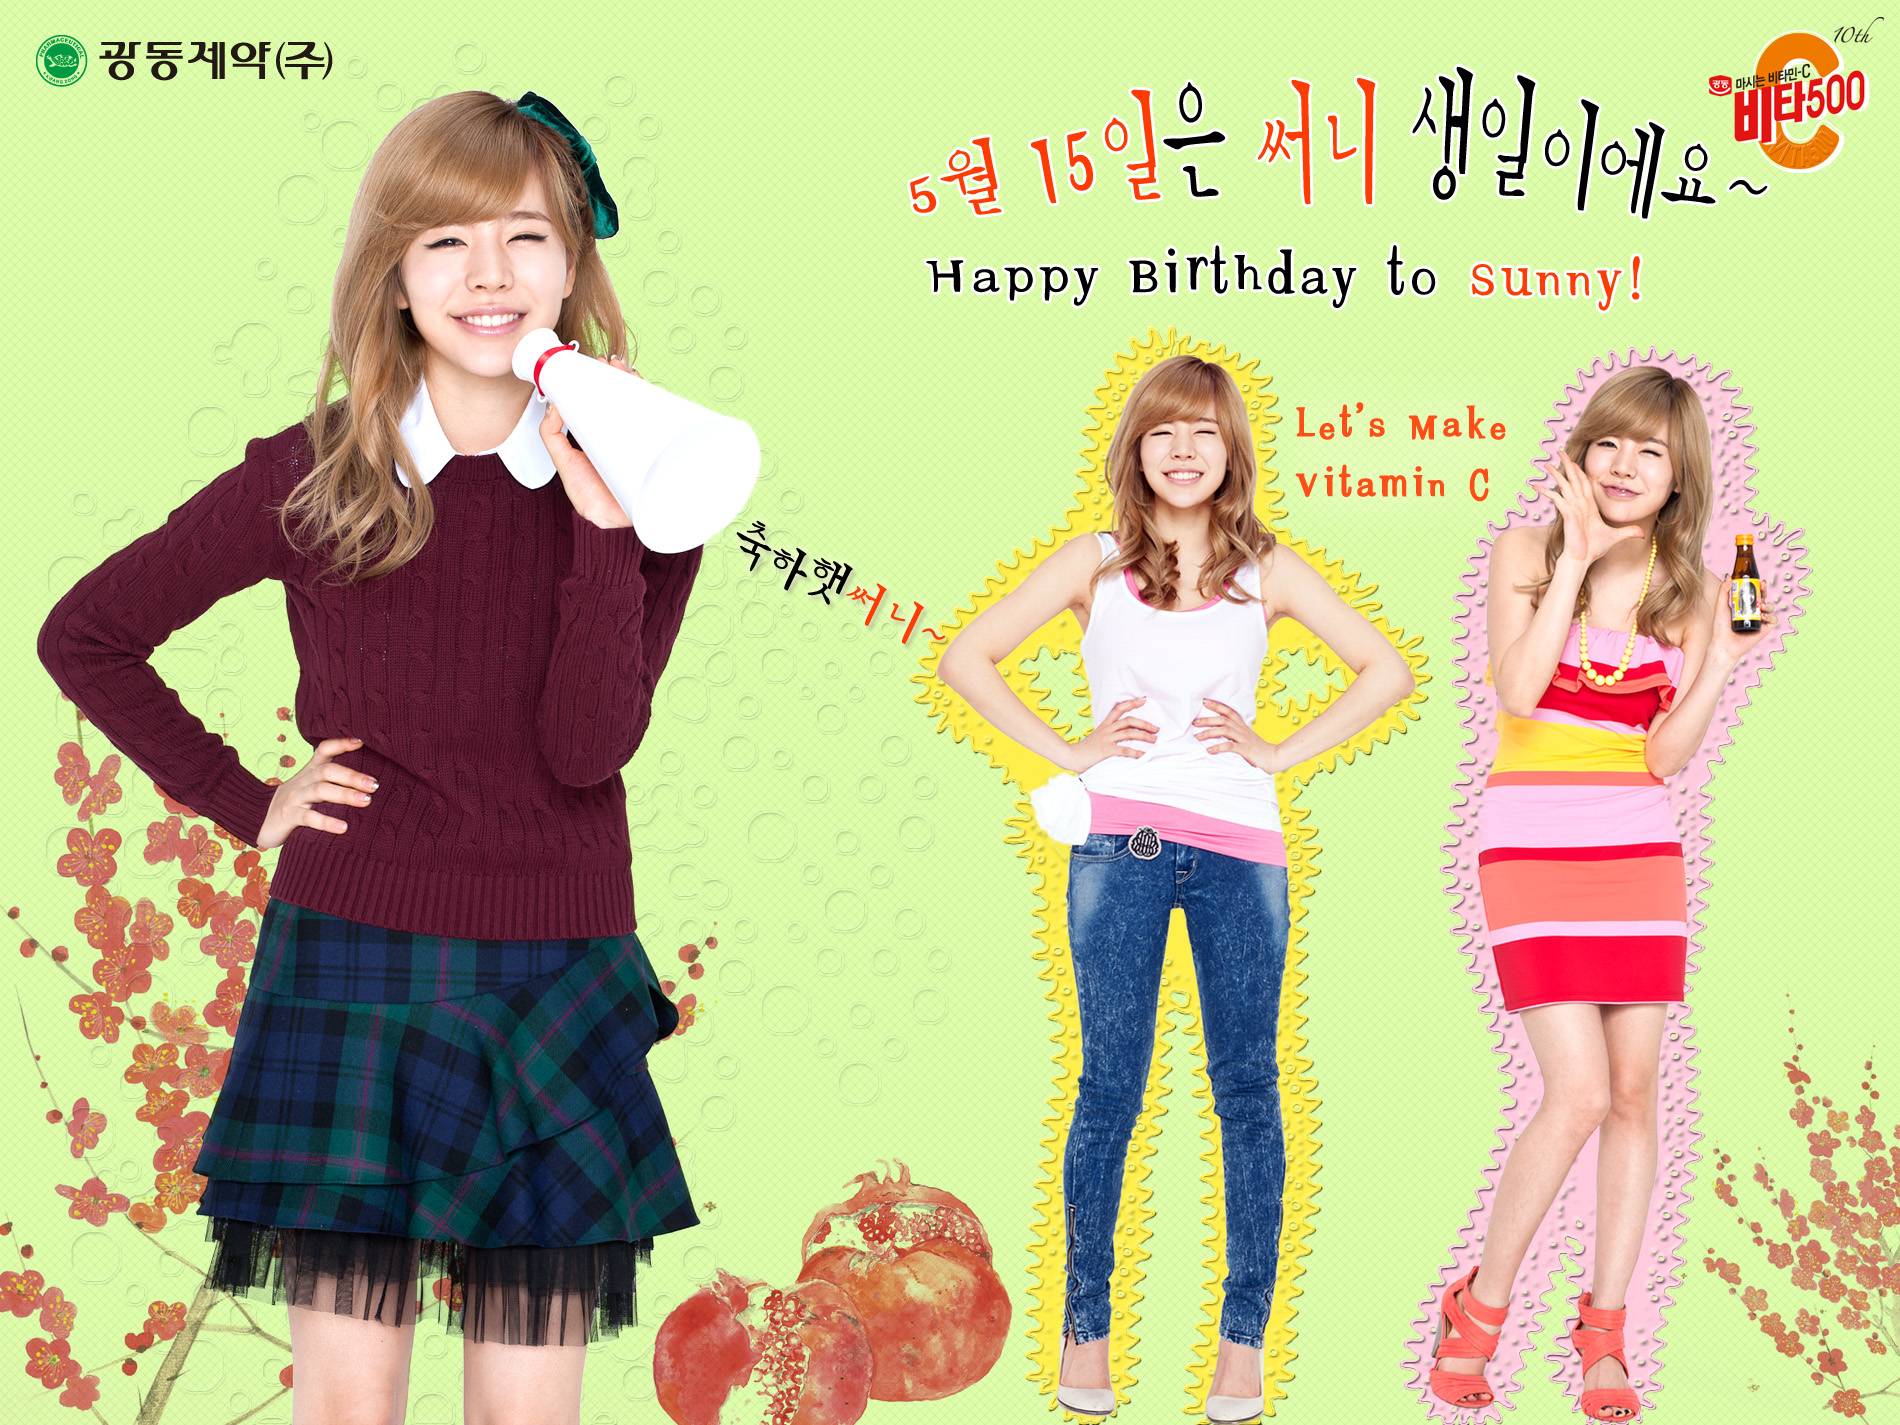 Vita500 releases a Happy Birthday wallpaper for SNSD&;s Sunny